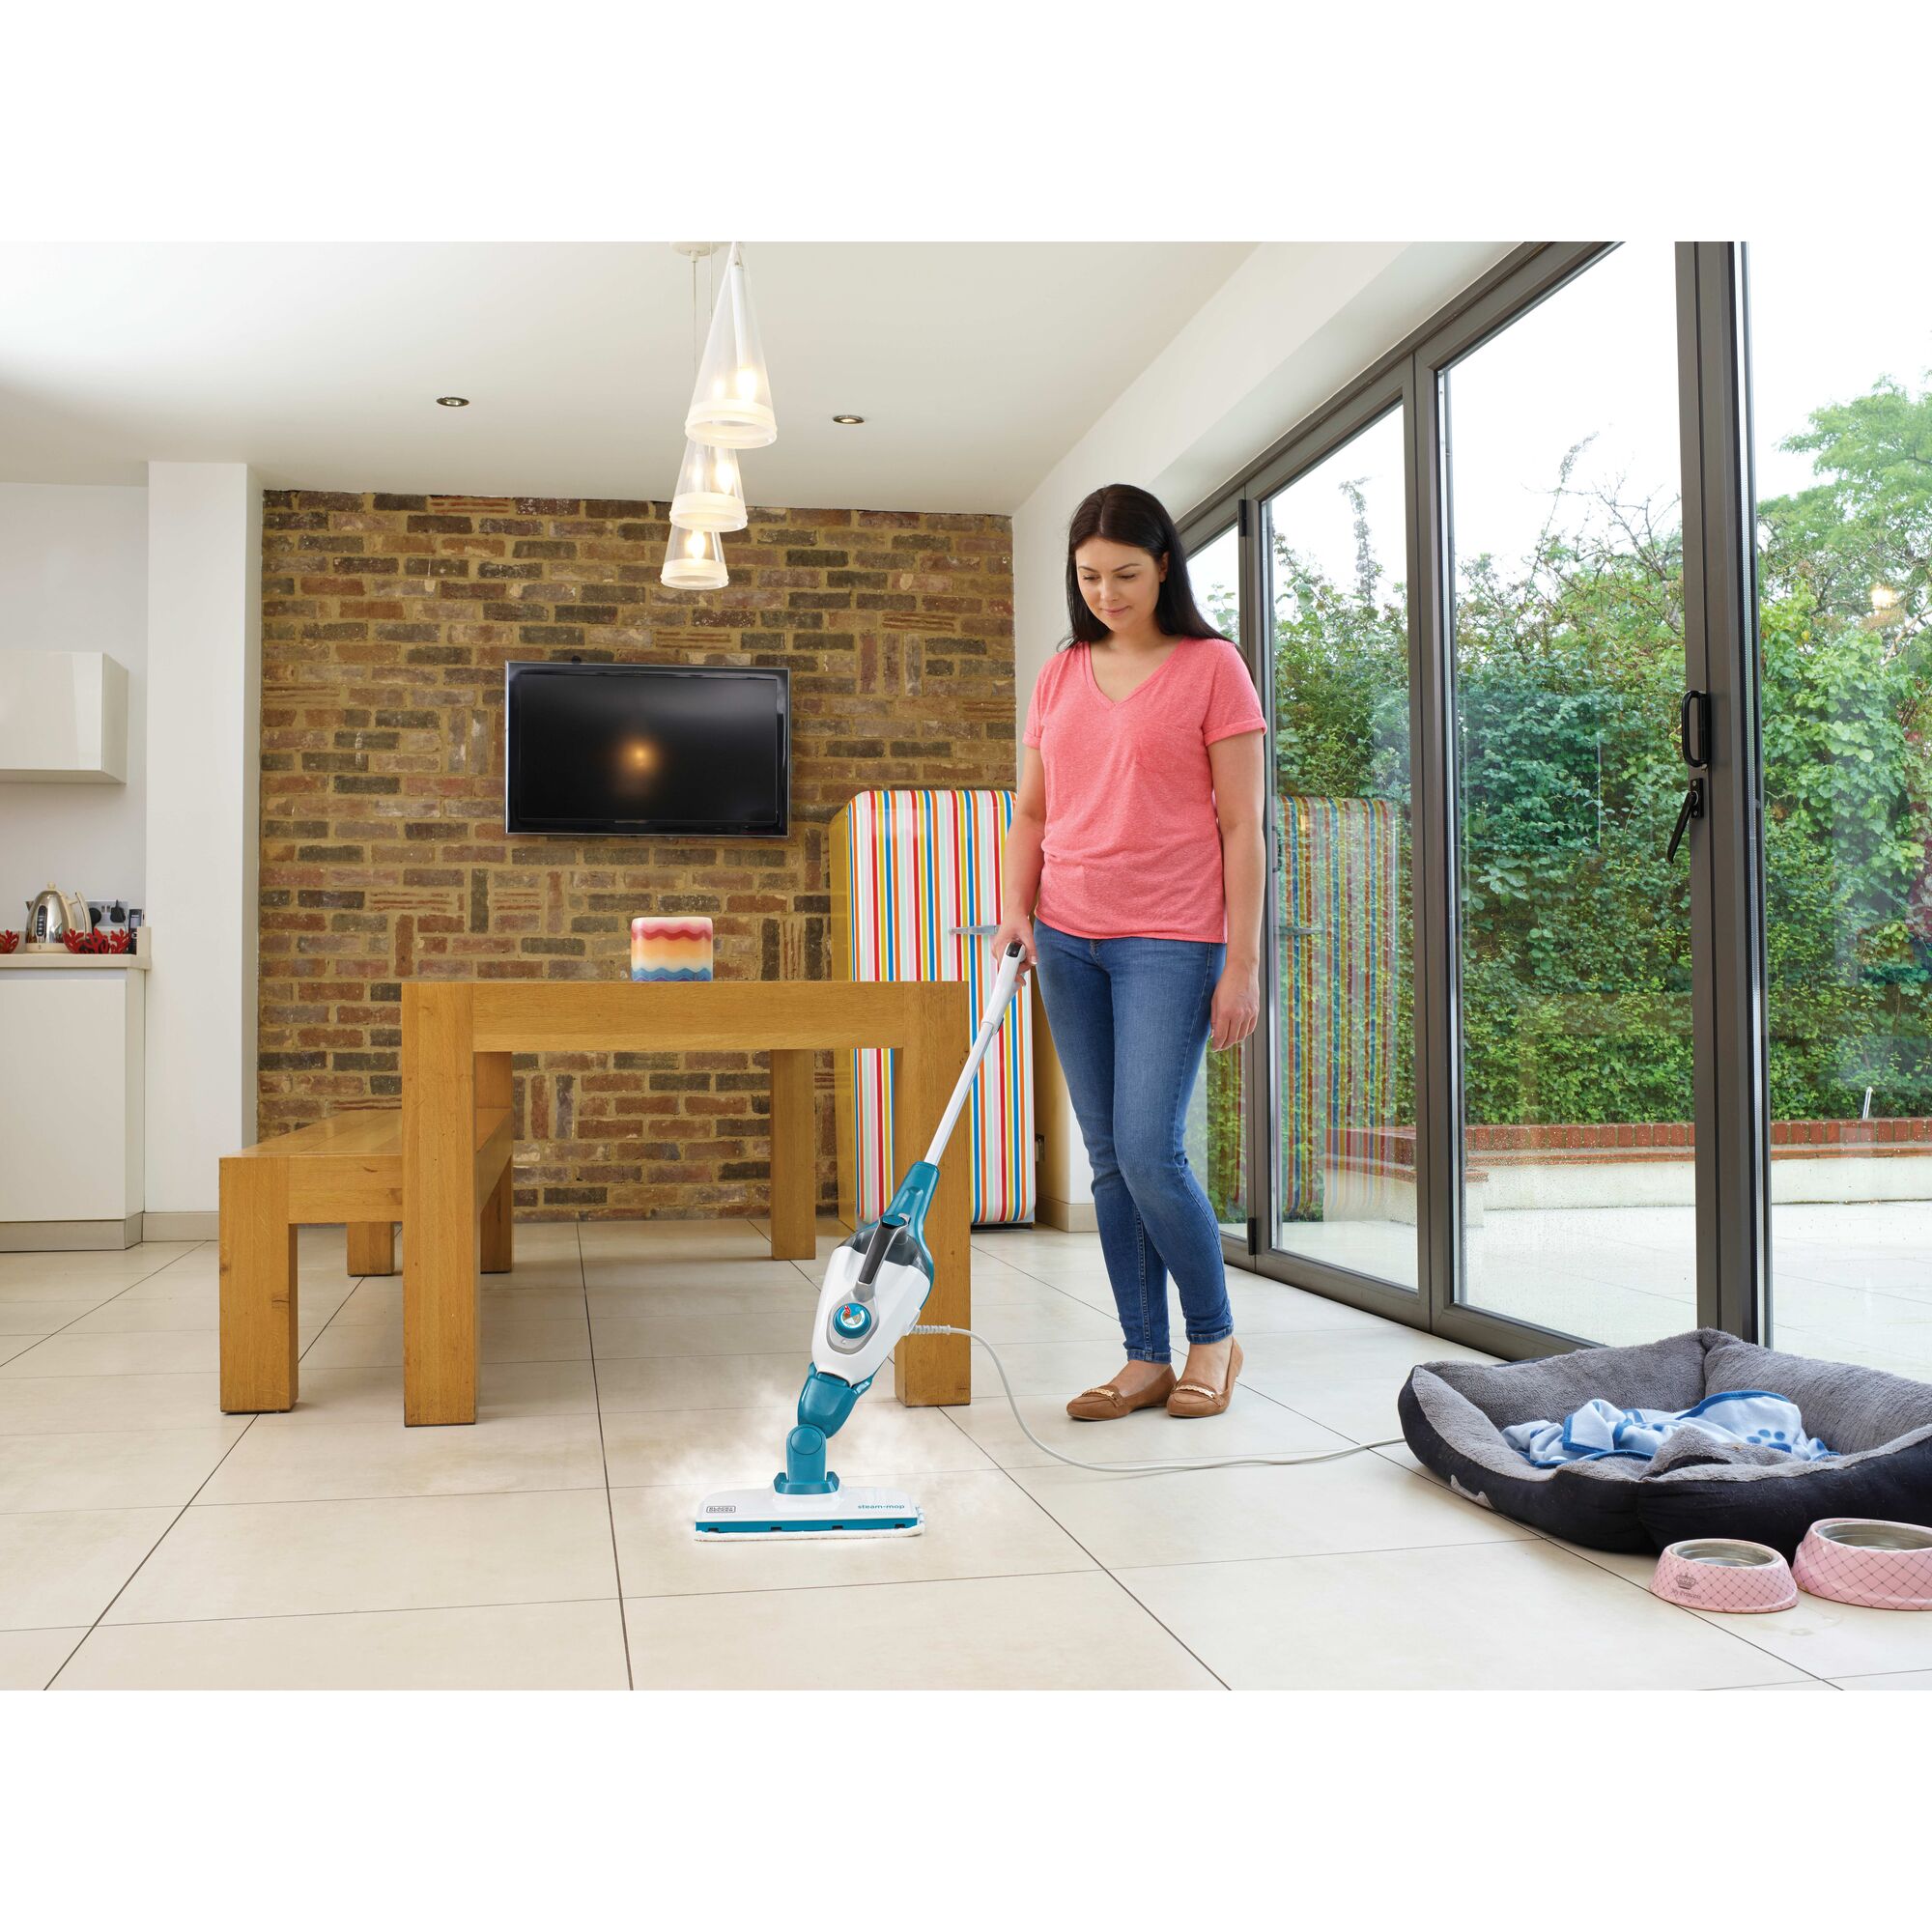 5 in 1 Steam Mop and Portable Steamer being used by person to clean floor tiles of house.